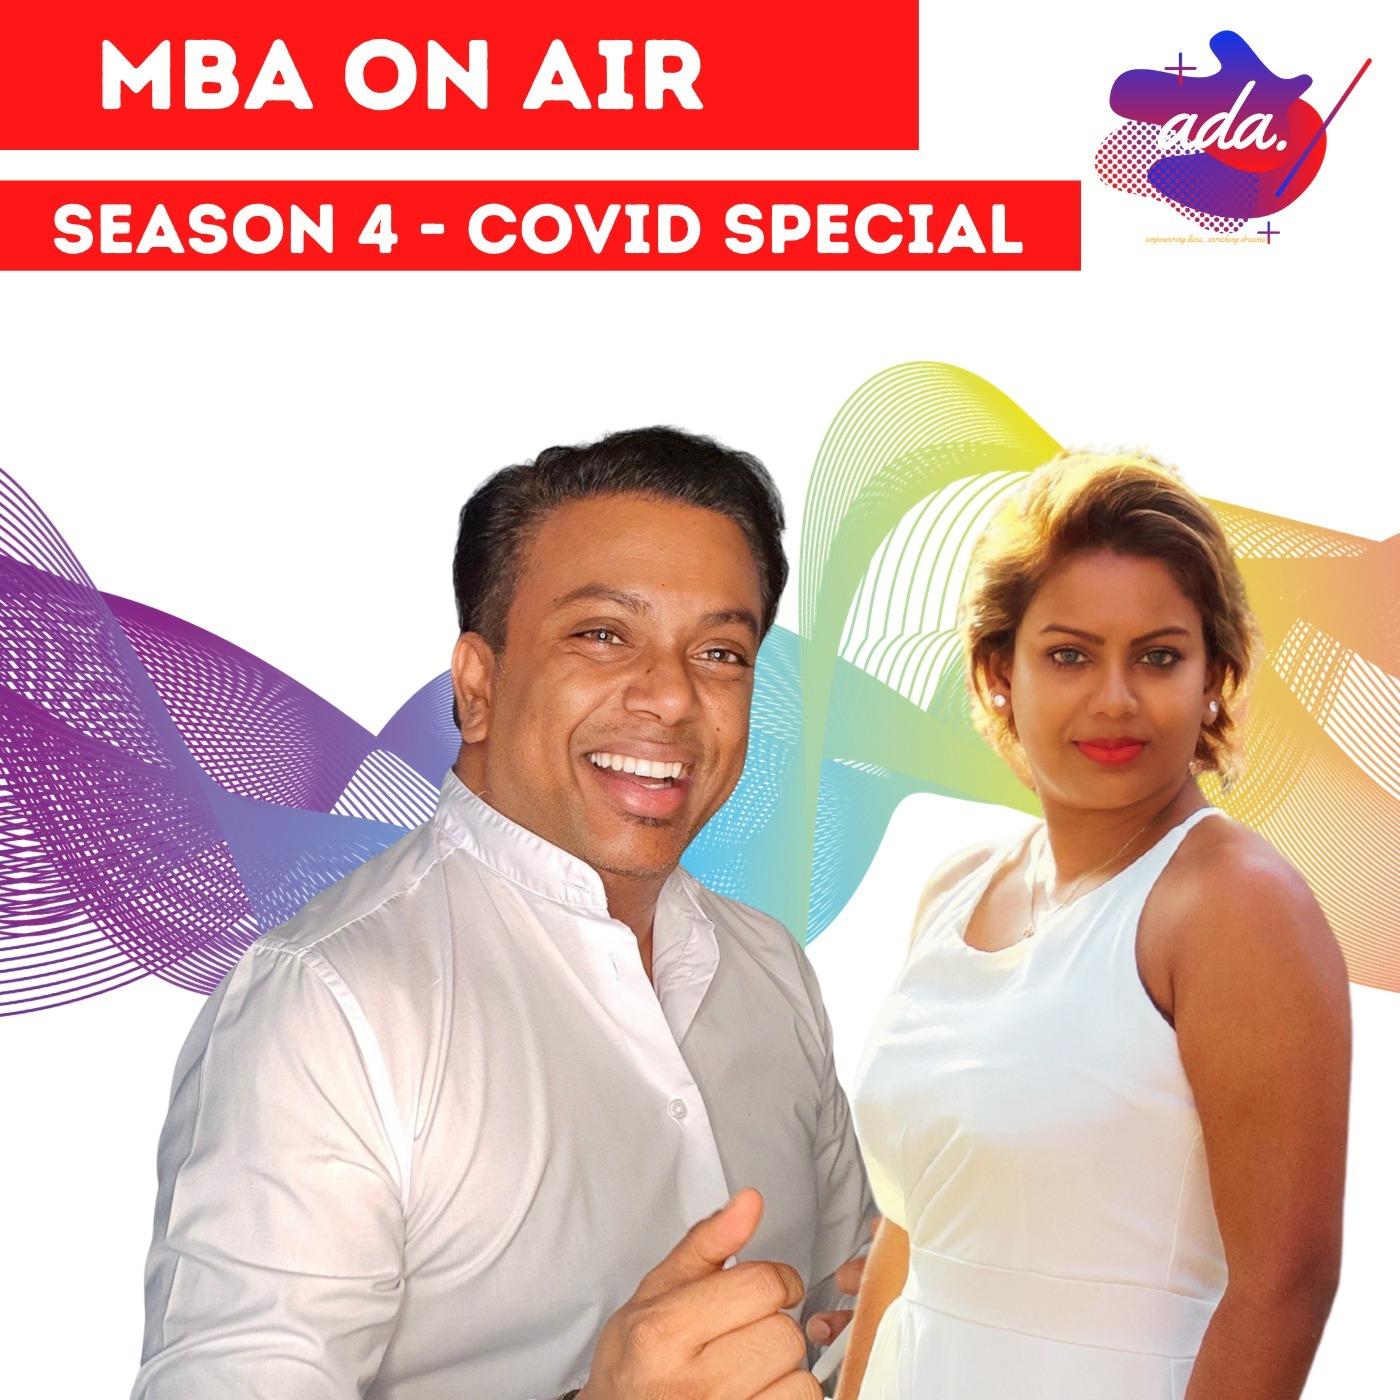 MBA ON AIR - COVID SPECIAL